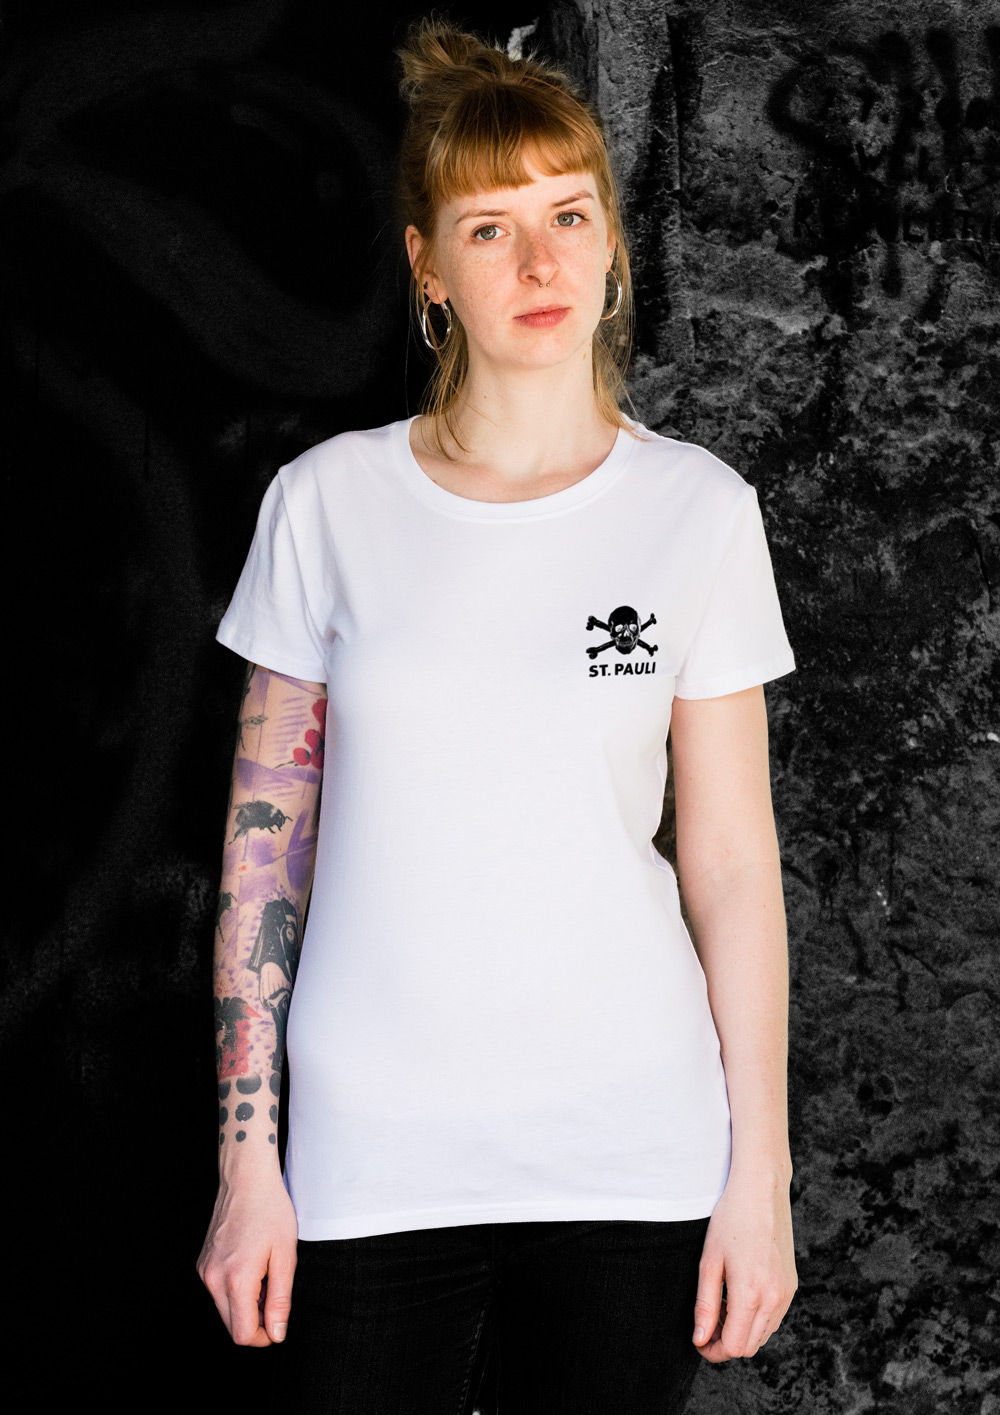 Women's T-Shirt No Place For - White